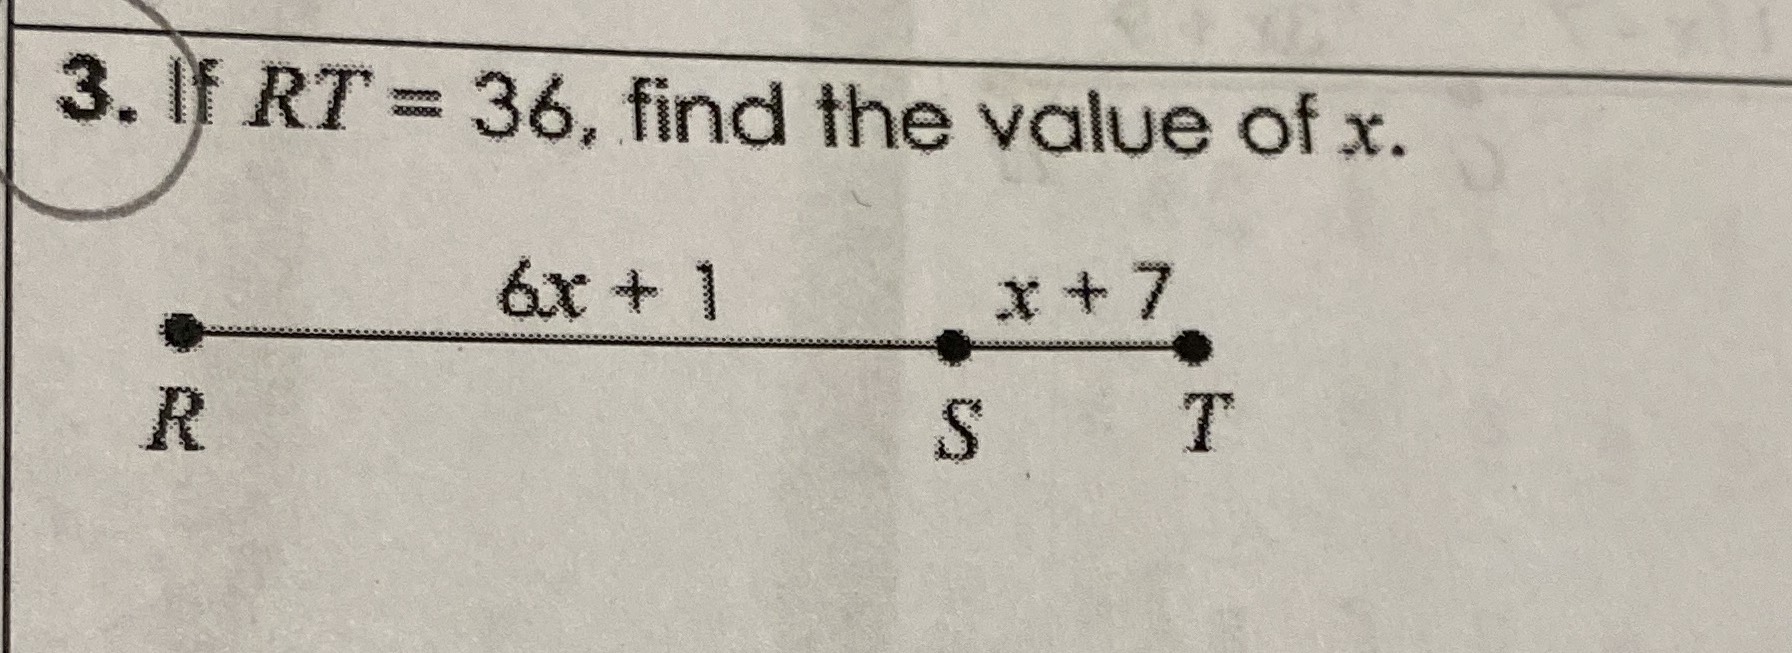 If \(\mathrm{RT}=36\), find the value of \(x\).